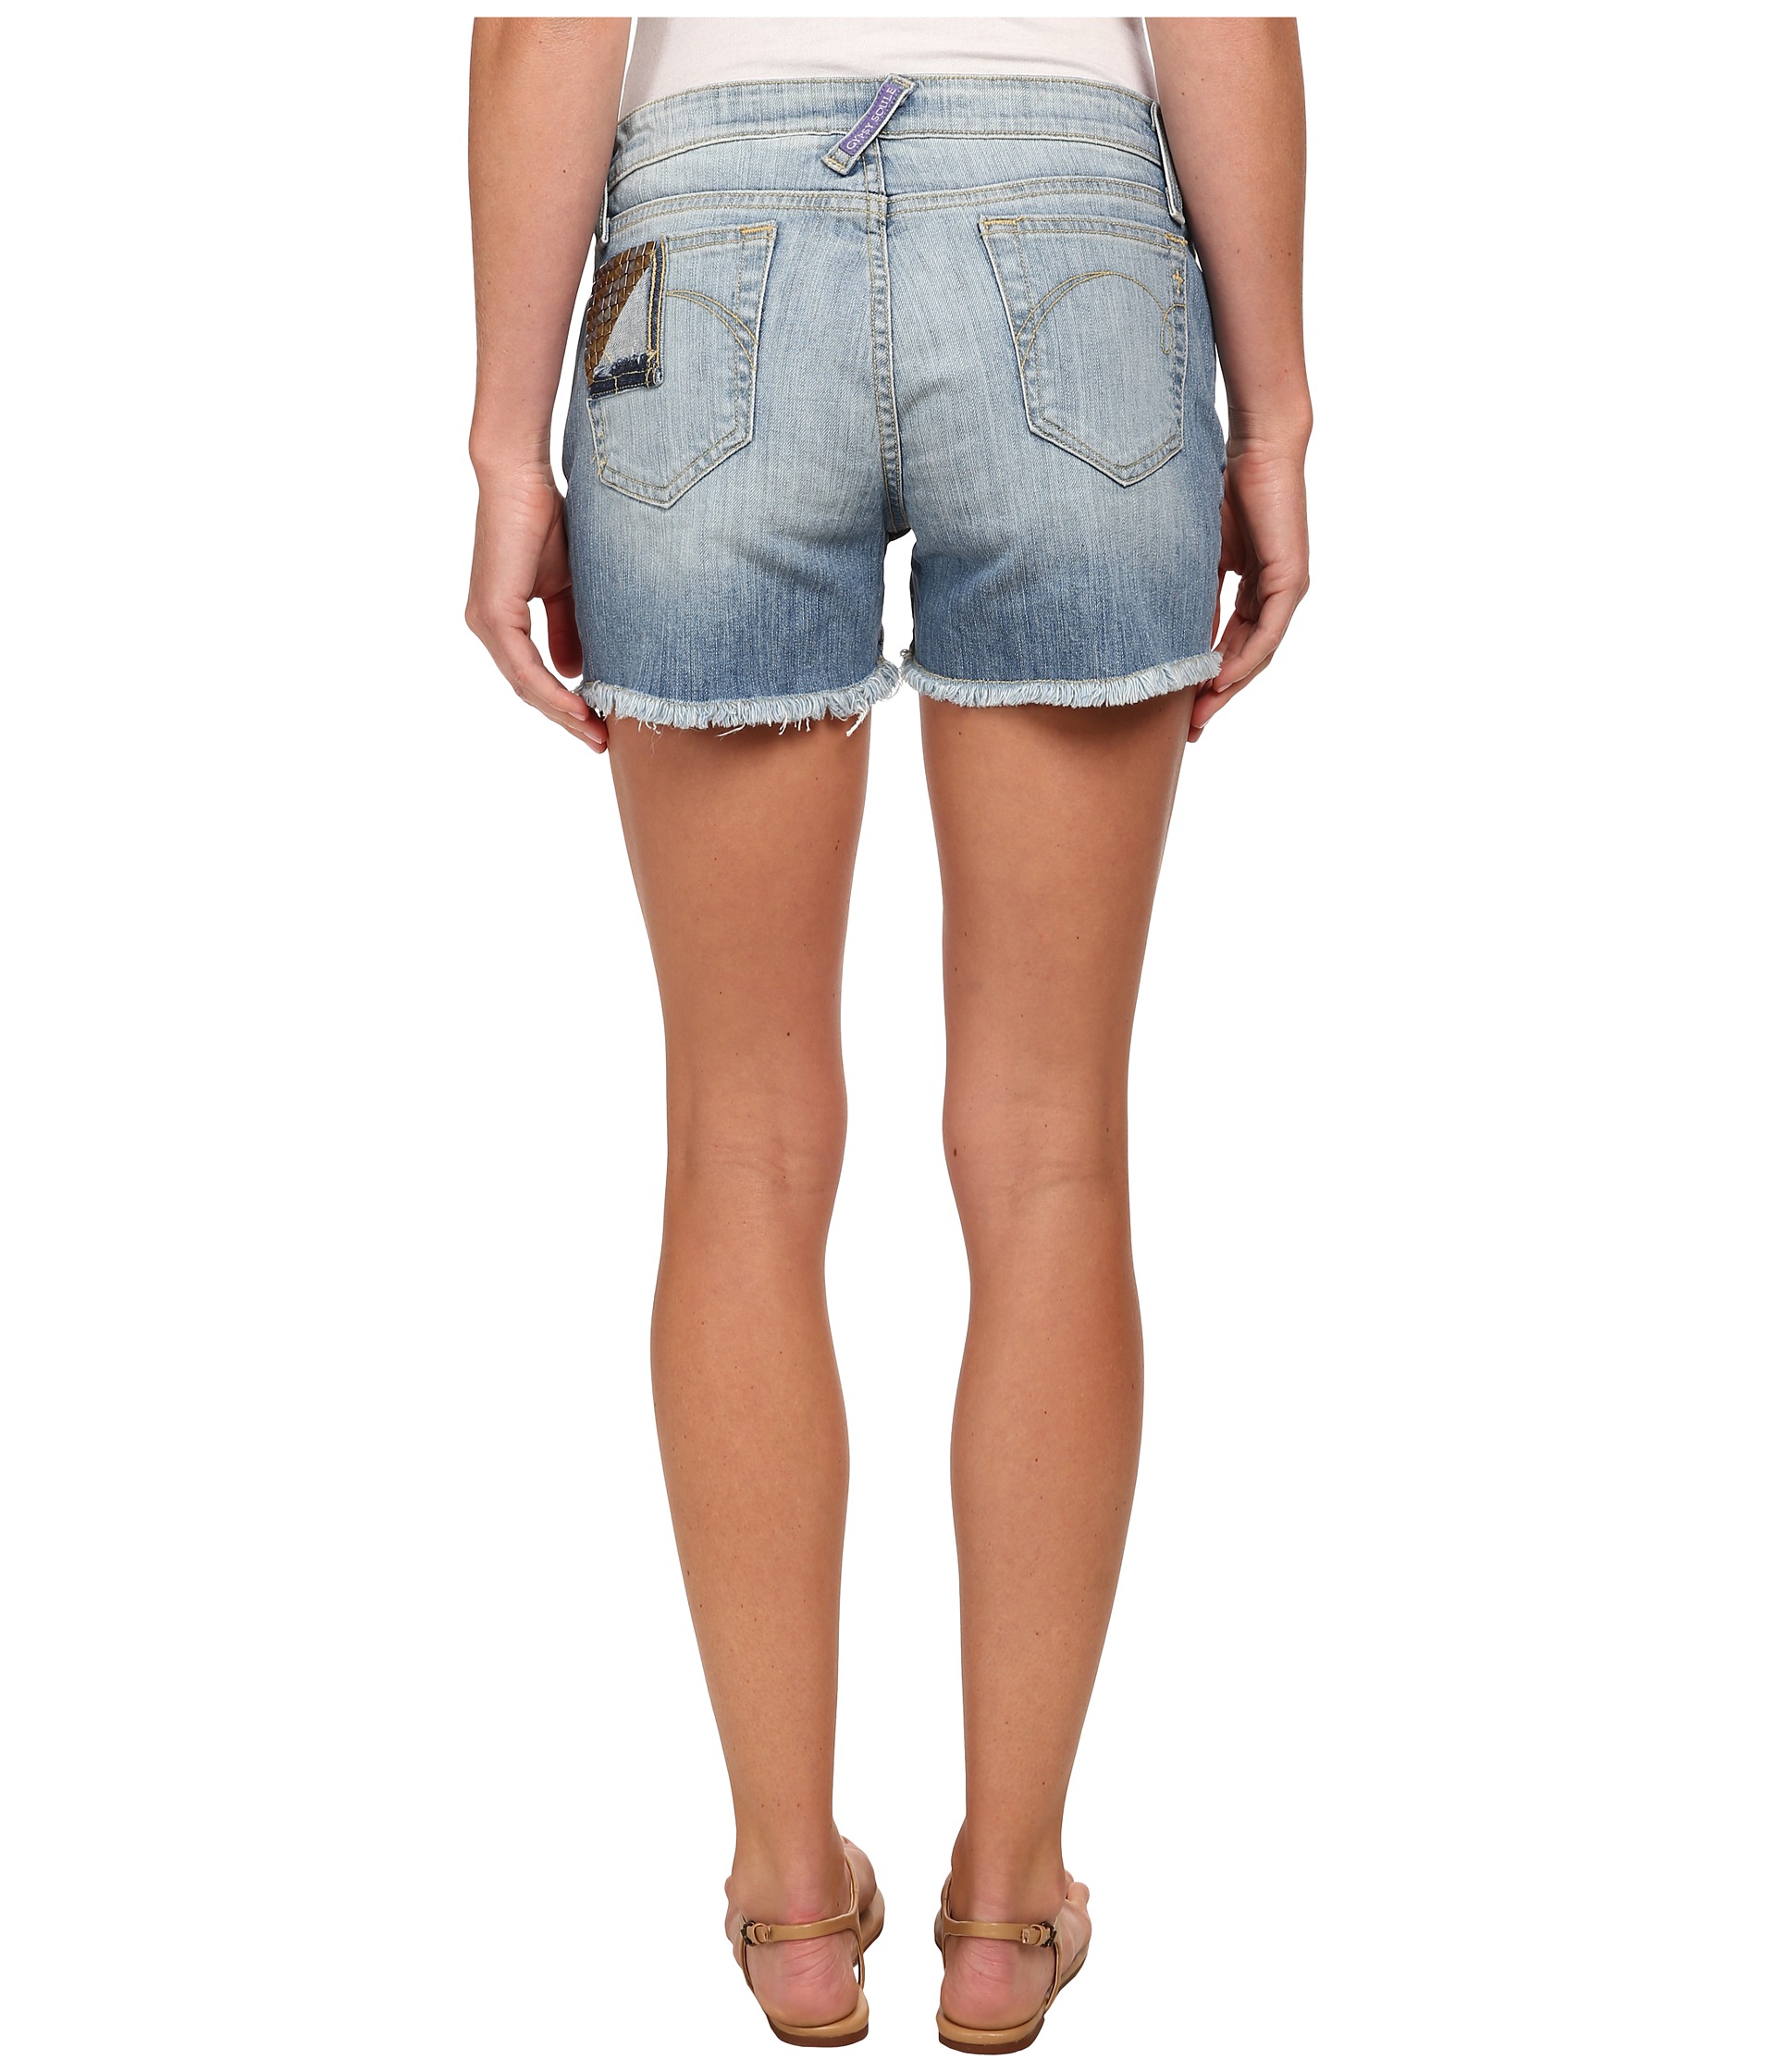 Gypsy SOULE Button-fly Closure Studette Shorts